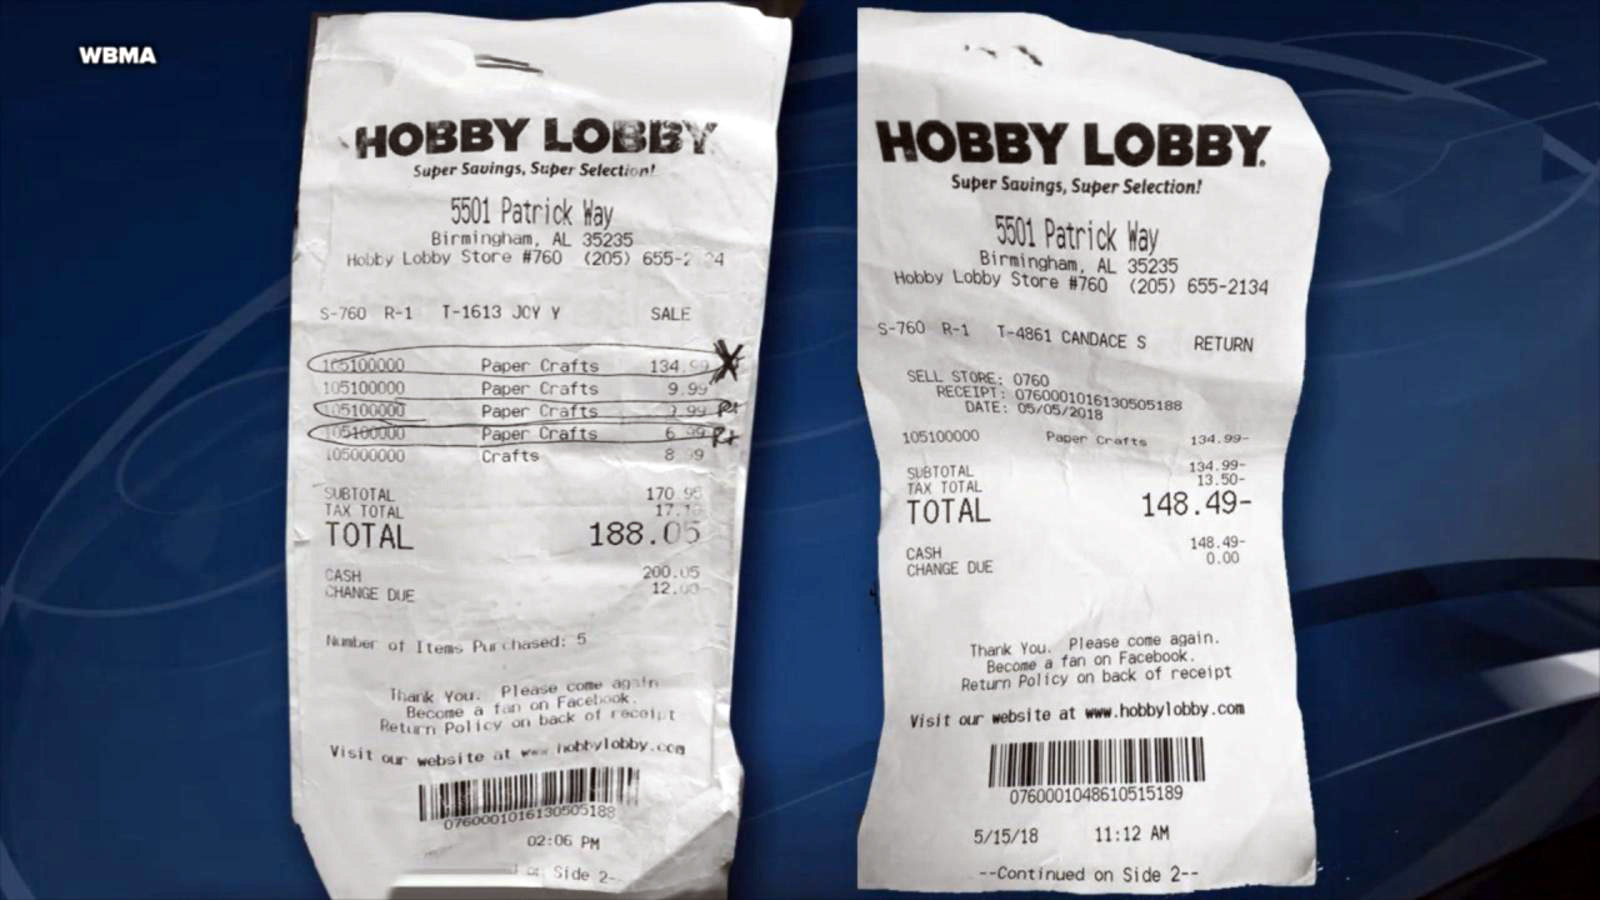 PHOTO: Receipts Brian Spurlock says he gave employees of a Hobby Lobby in Trussville, Ala., who he claims racially profiled him and called the police because he vaguely looked like a suspect in a check cashing scheme.